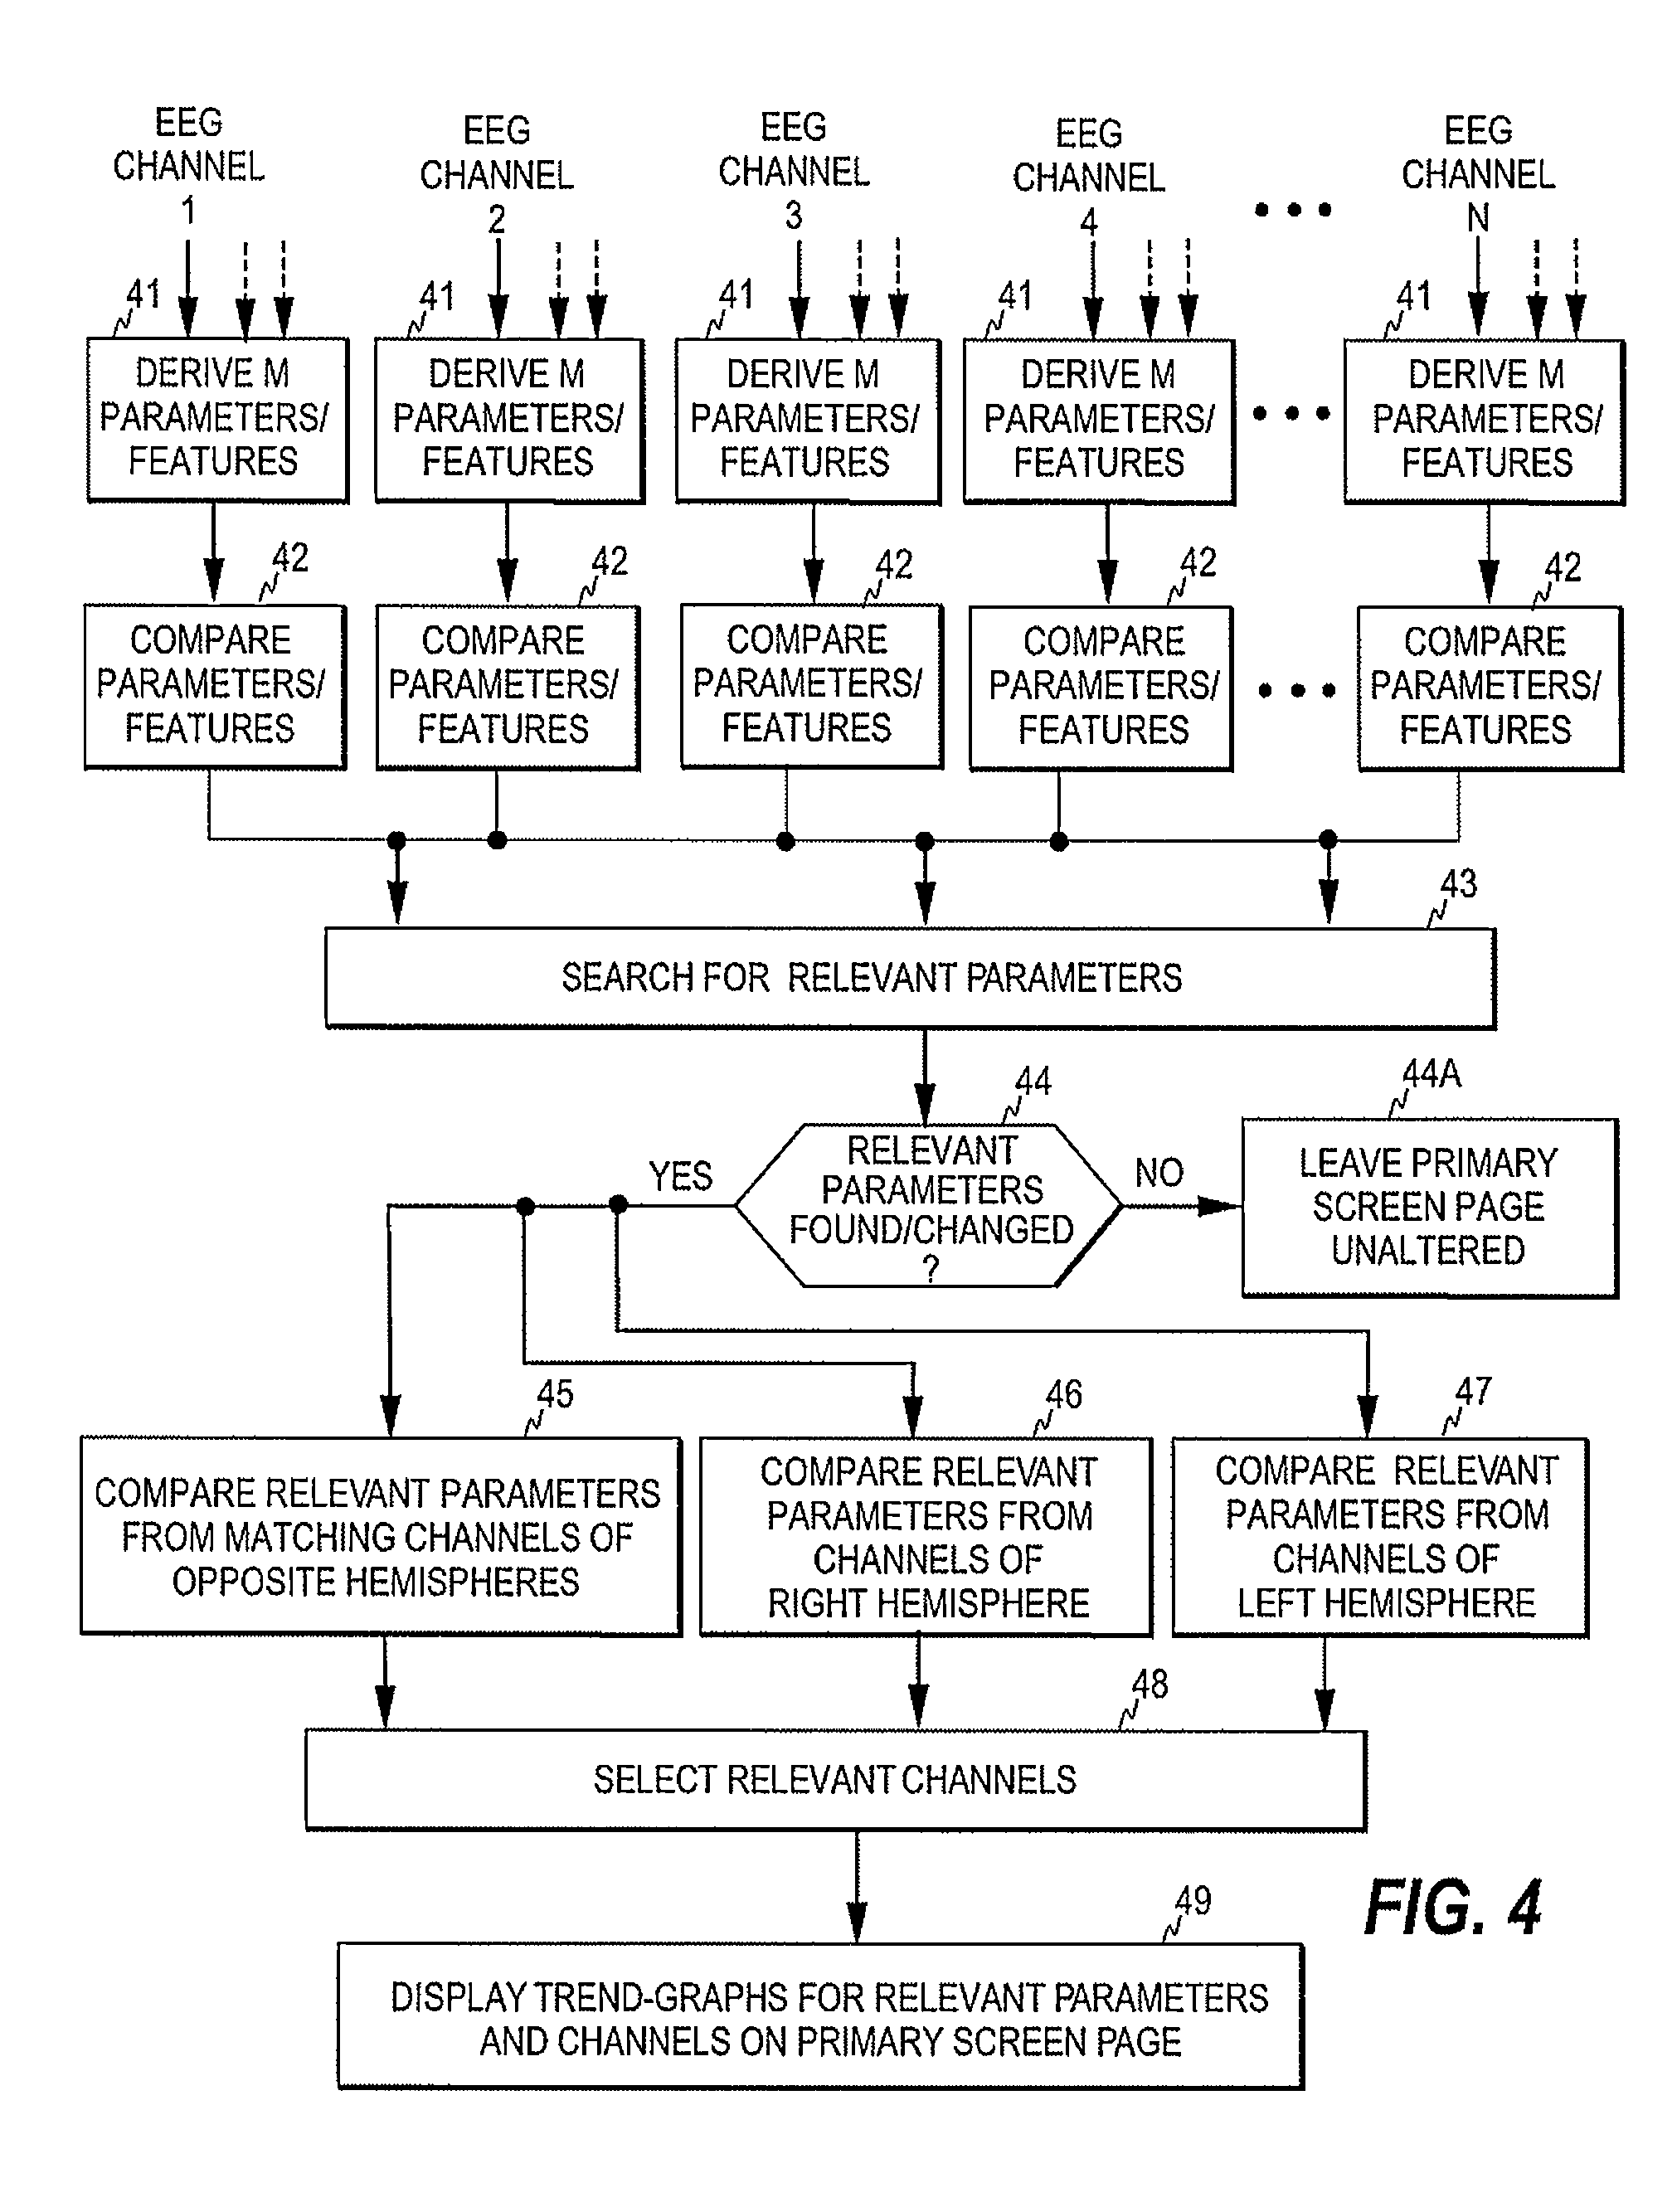 Method, device and computer product for EEG monitoring, analysis and display